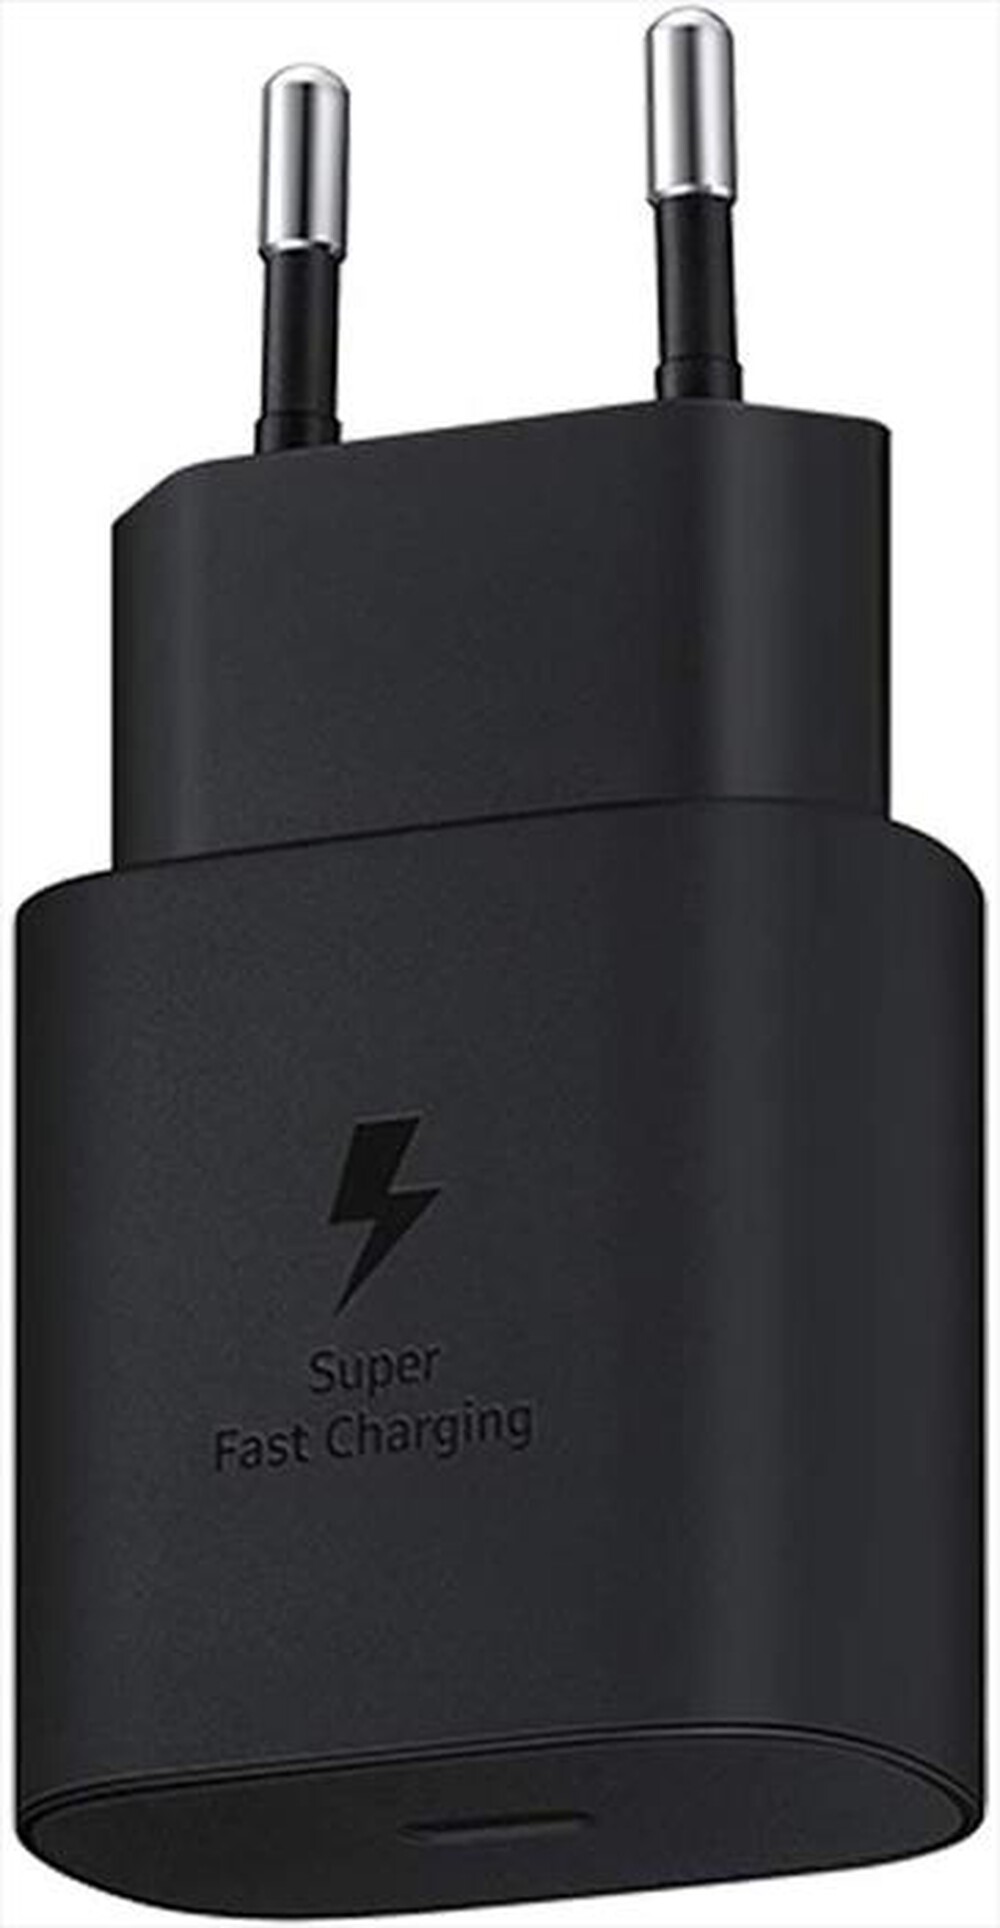 "SAMSUNG - TRAVEL ADAPTER 25W (W/O CABLE) - Nero"